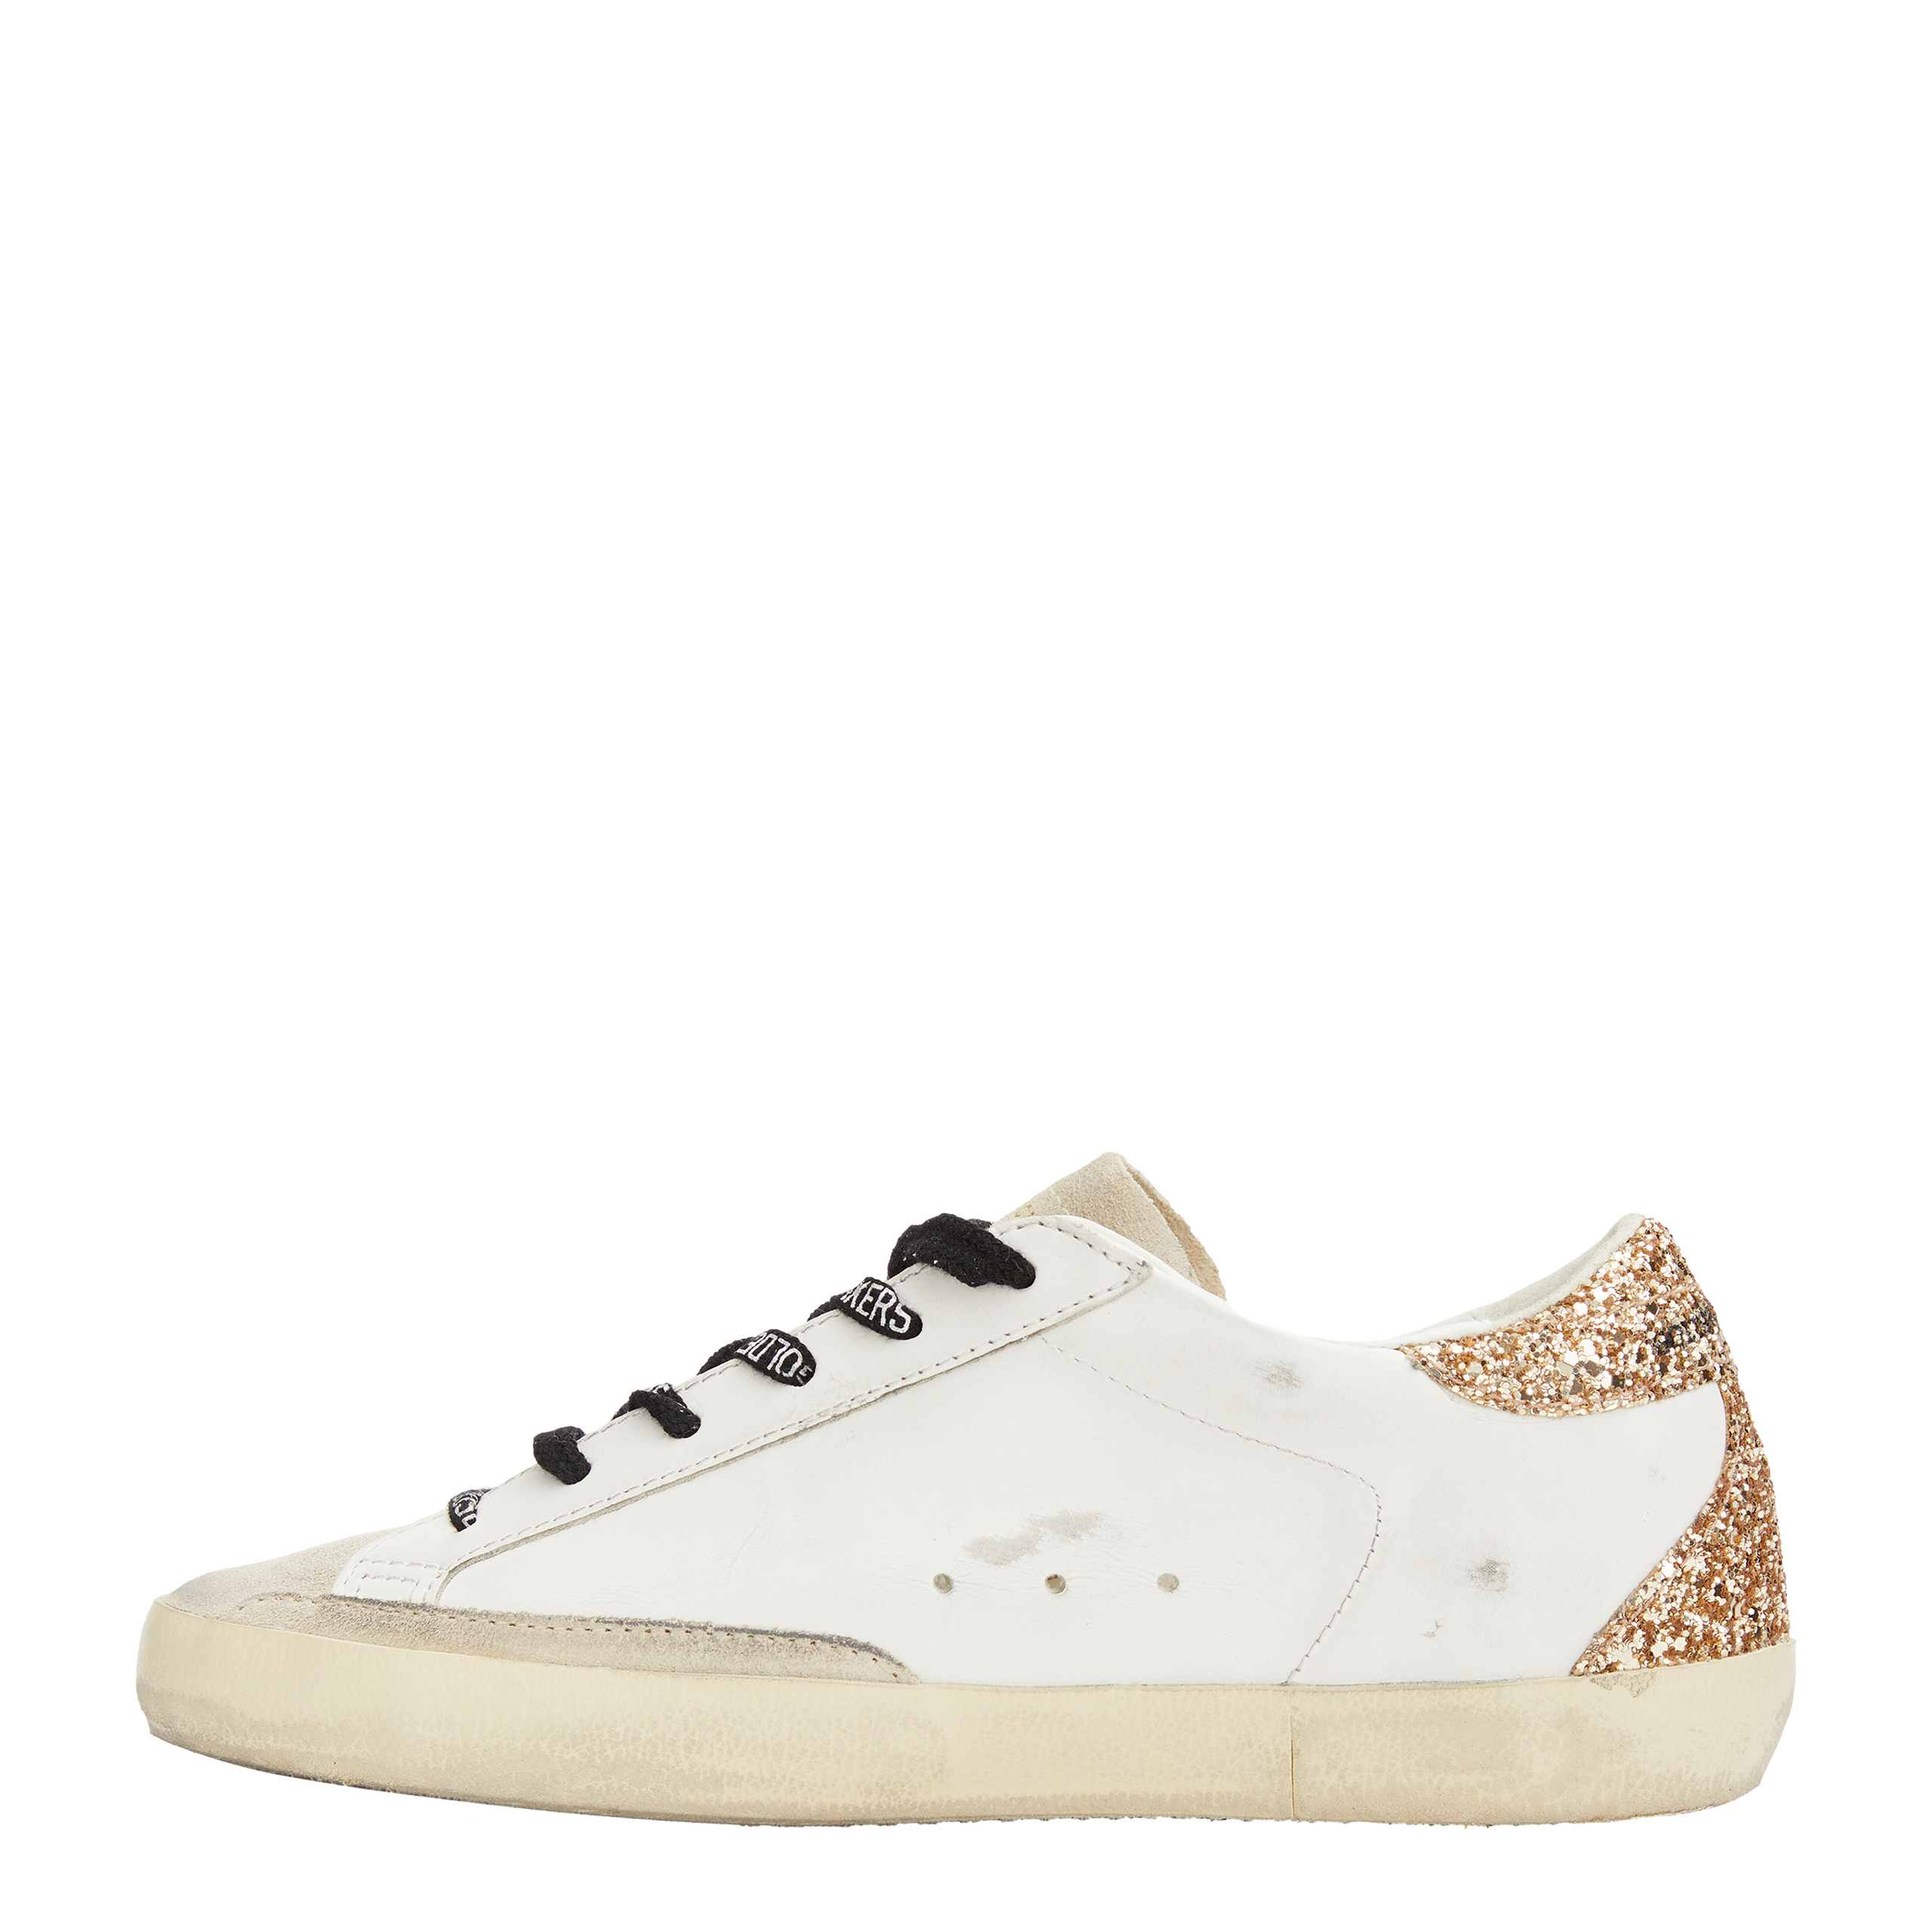 None Golden Goose Deluxe Brand GWF00102/F005358/82532, размер 36;41 GWF00102/F005358/82532 - фото 3